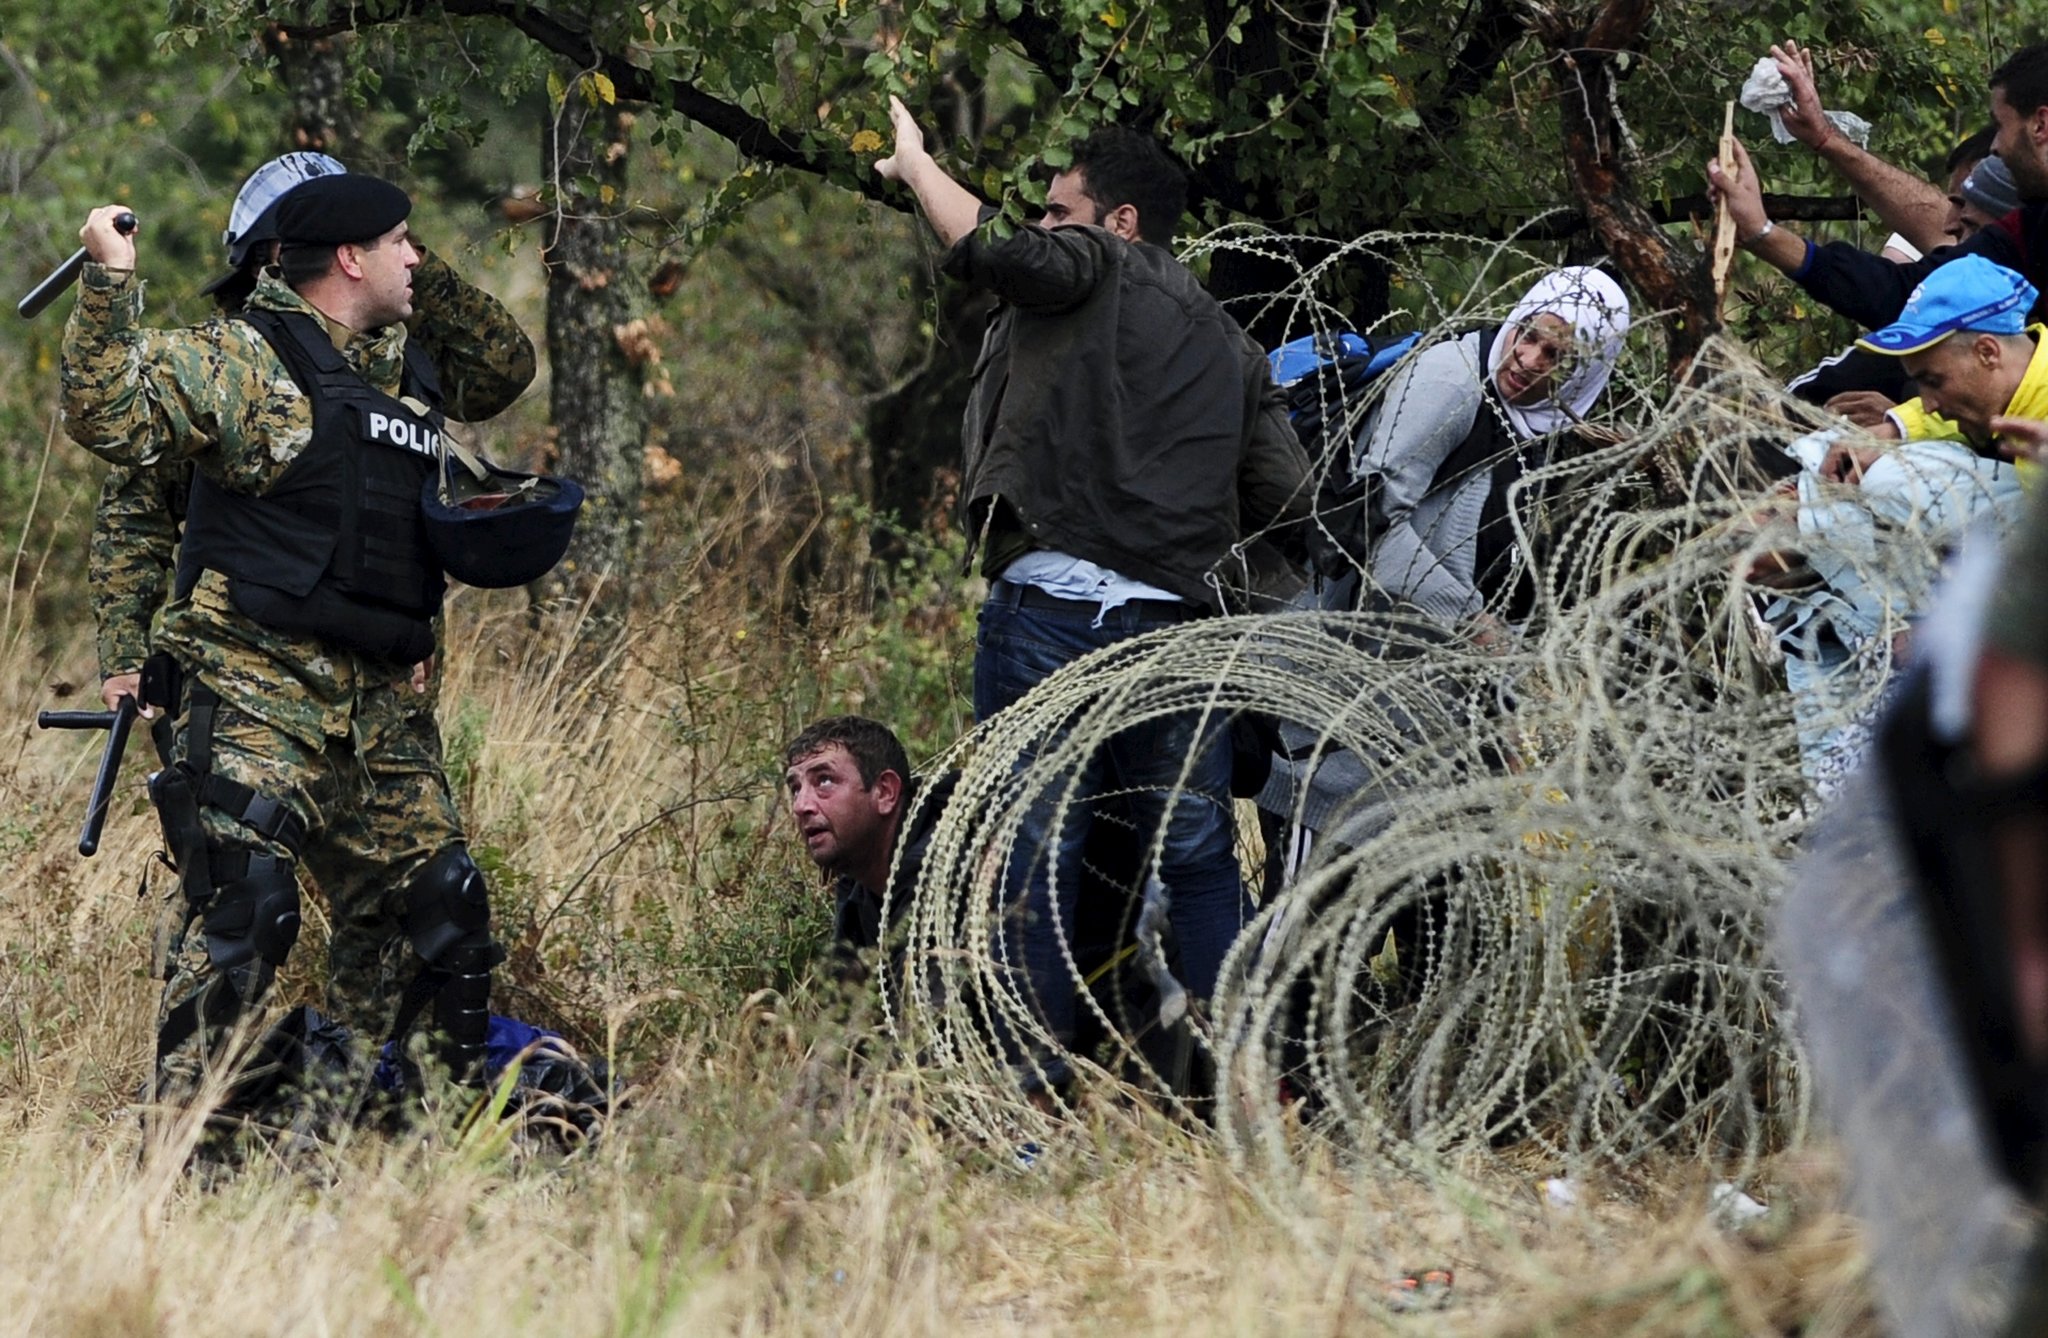 Refugees trying to cross the border from Greece into Macedonia are met with violence from border guards.